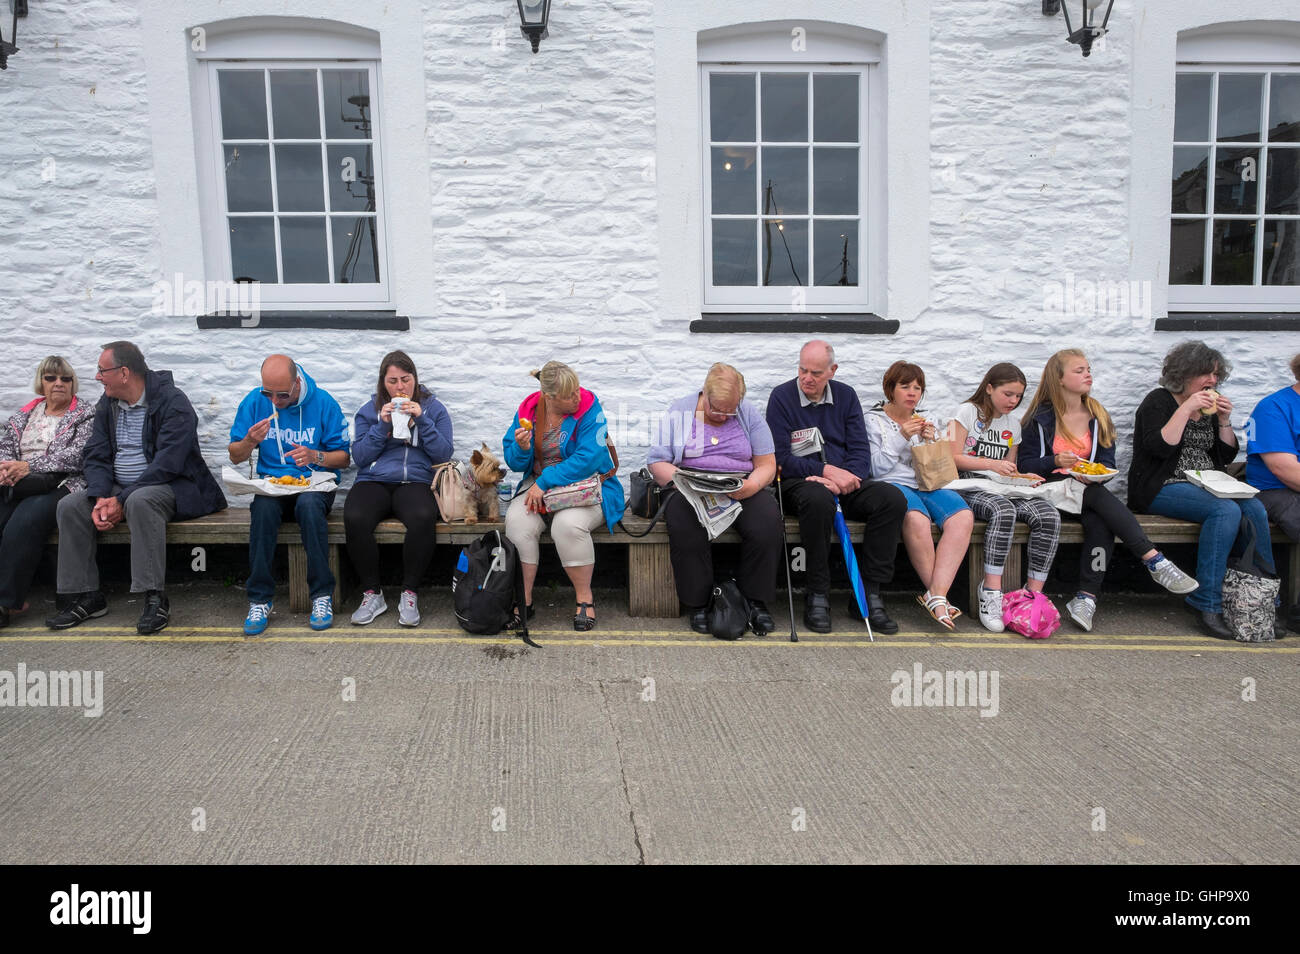 A row of people eating fish and chips at Mevagissey, Cornwall, England, UK Stock Photo